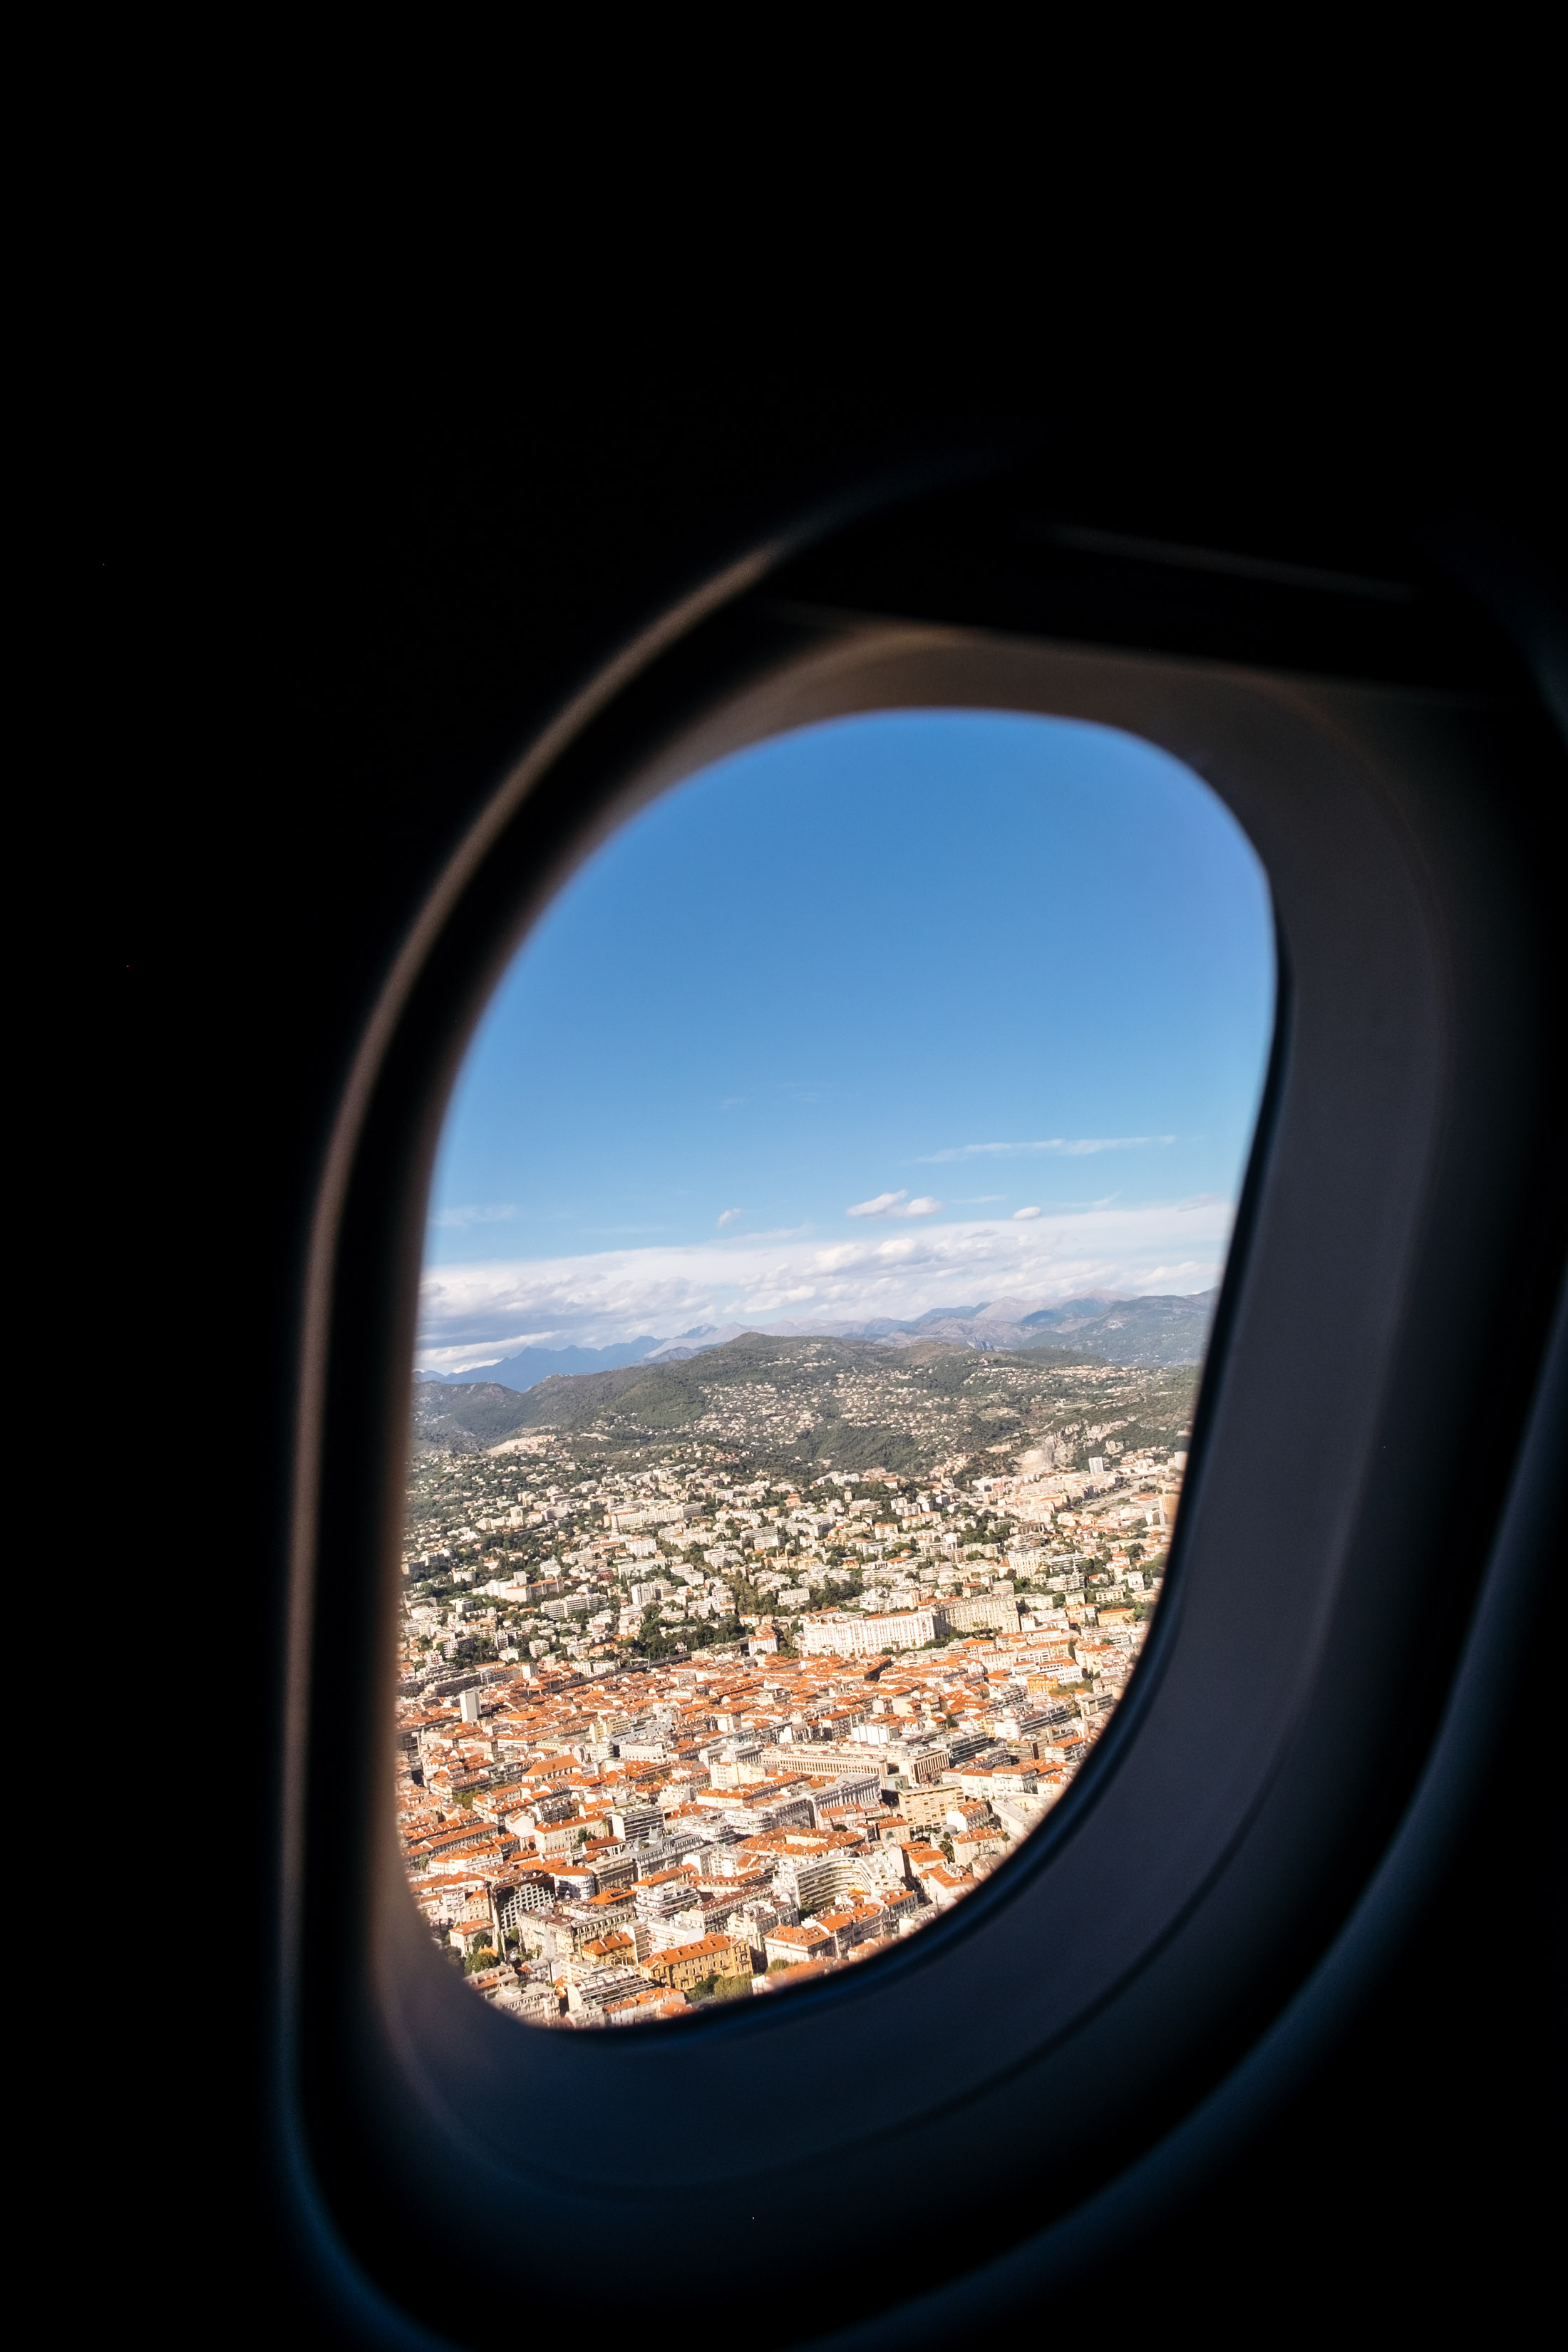 View of Nice in the foreground and Grasse in the background from my airplane window